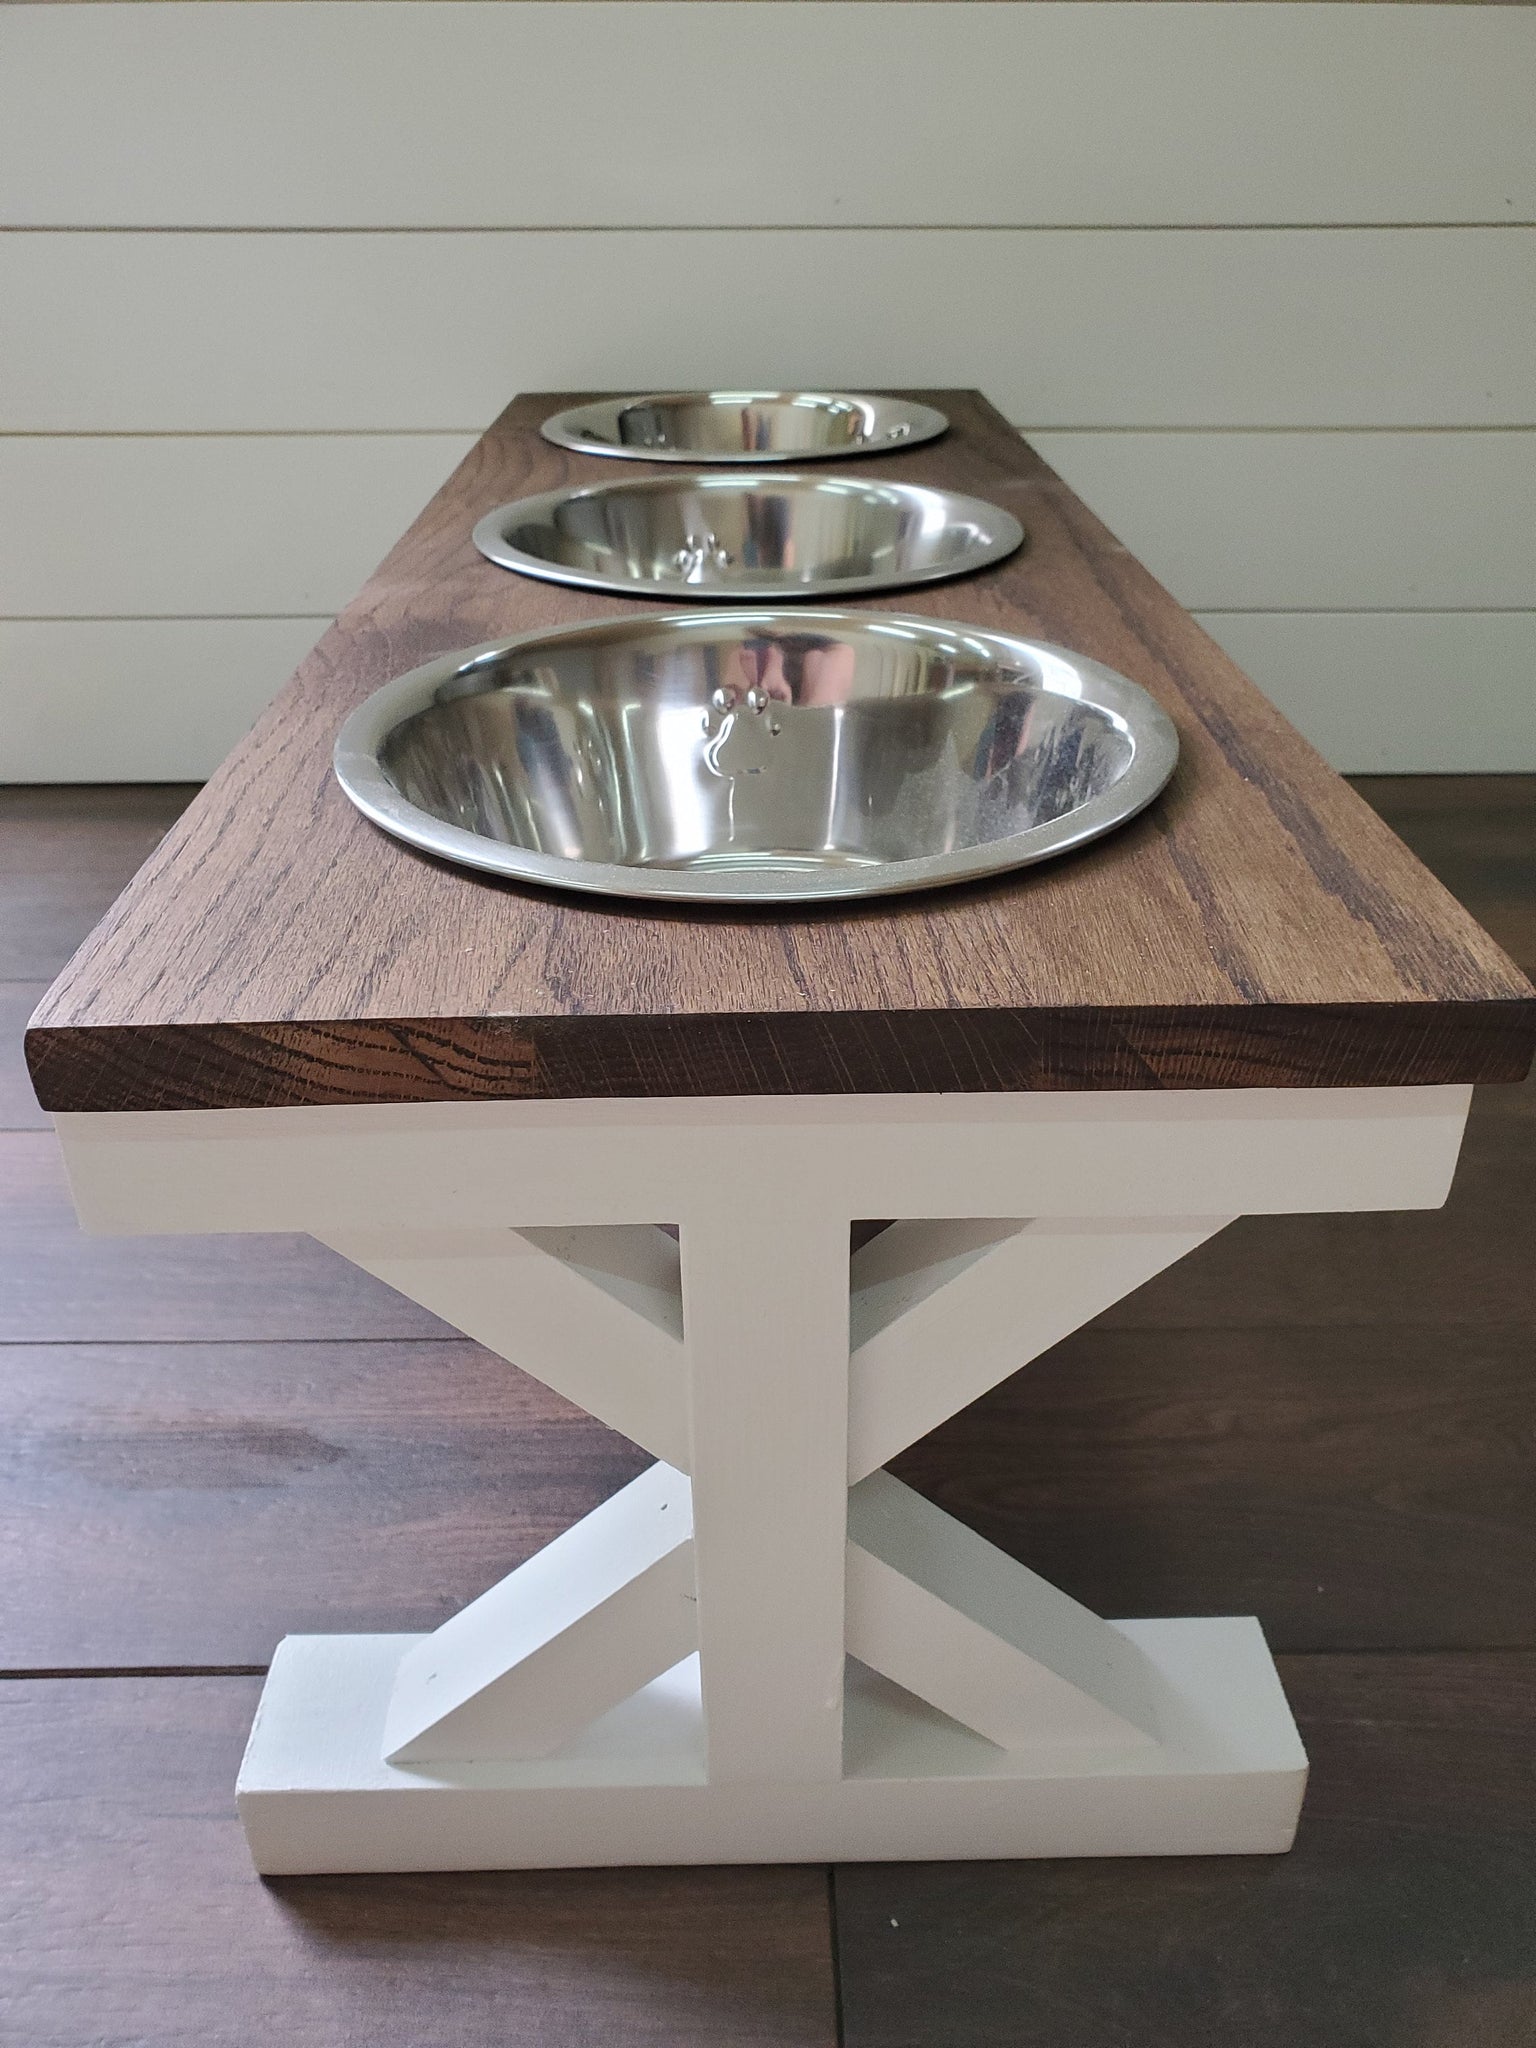 Sfugno Dog Bowls Elevated 3 Heights 4in 8in 13in Rustic Wood